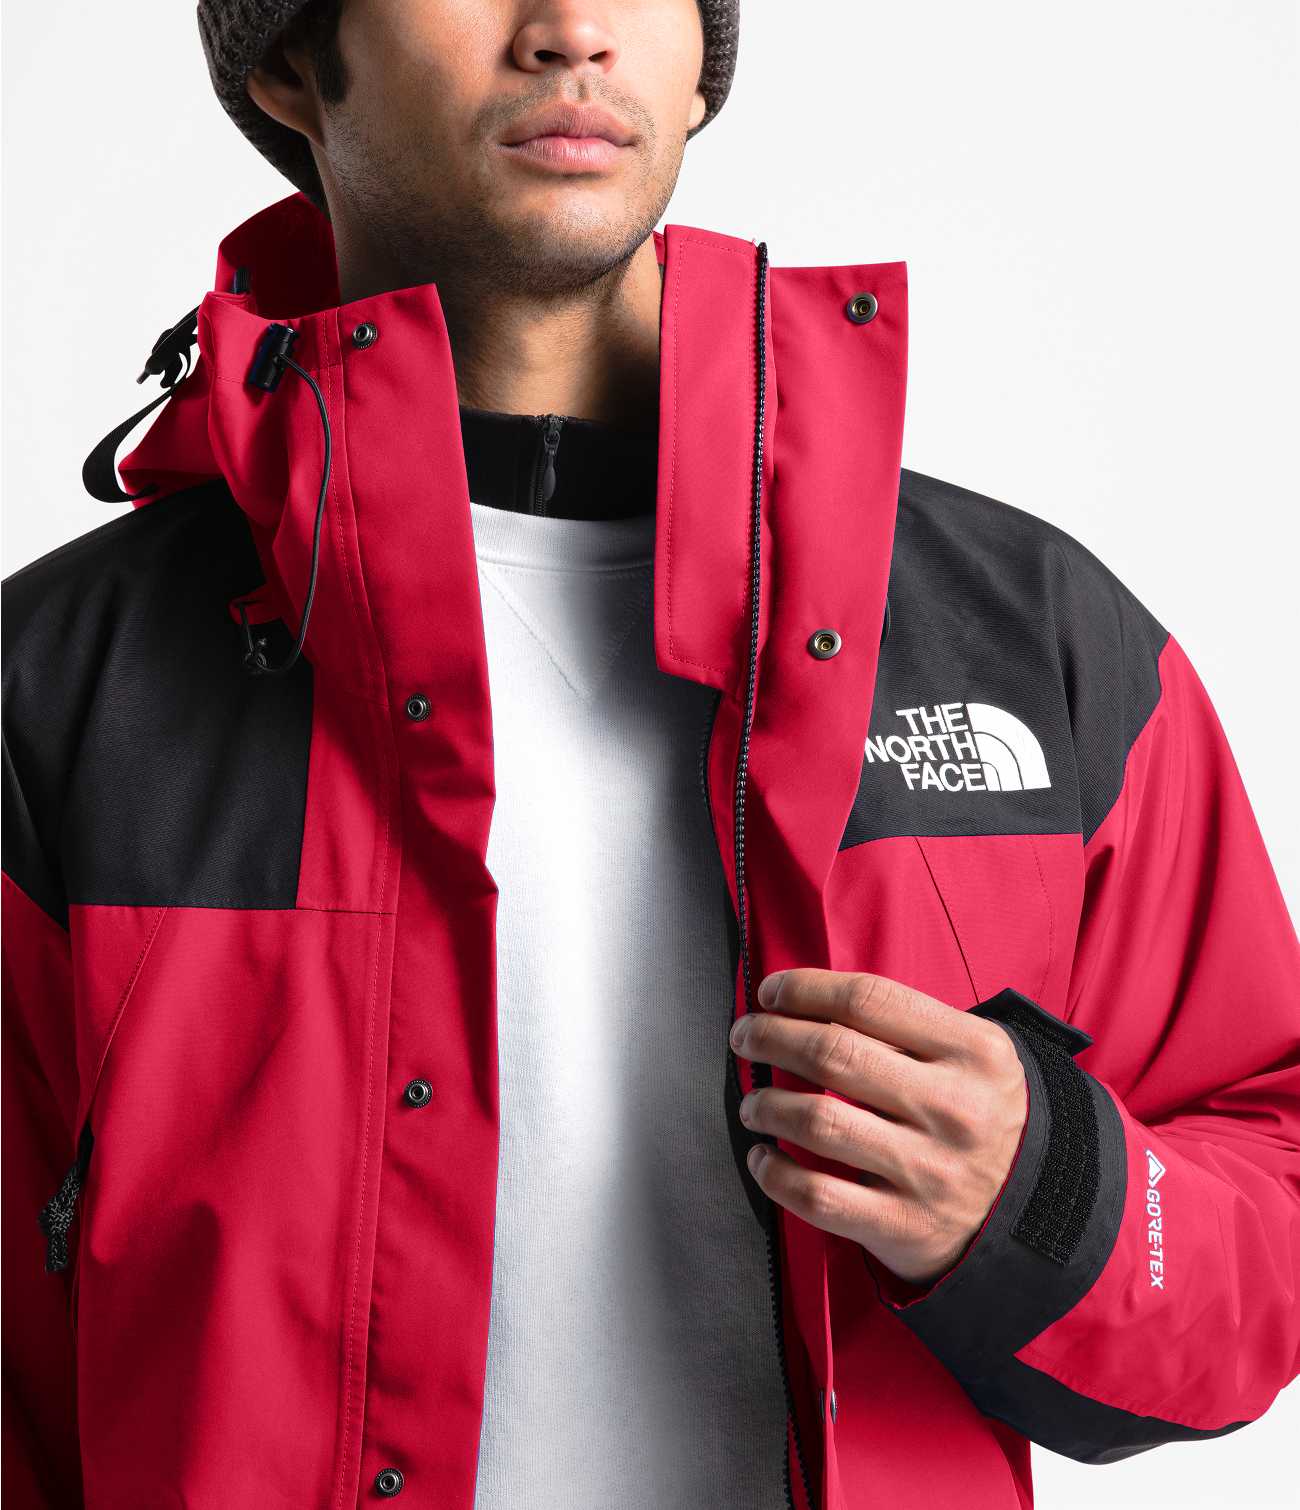 The North Face Renewed Marketplace - 1990 MOUNTAIN JACKET GORE-TEX